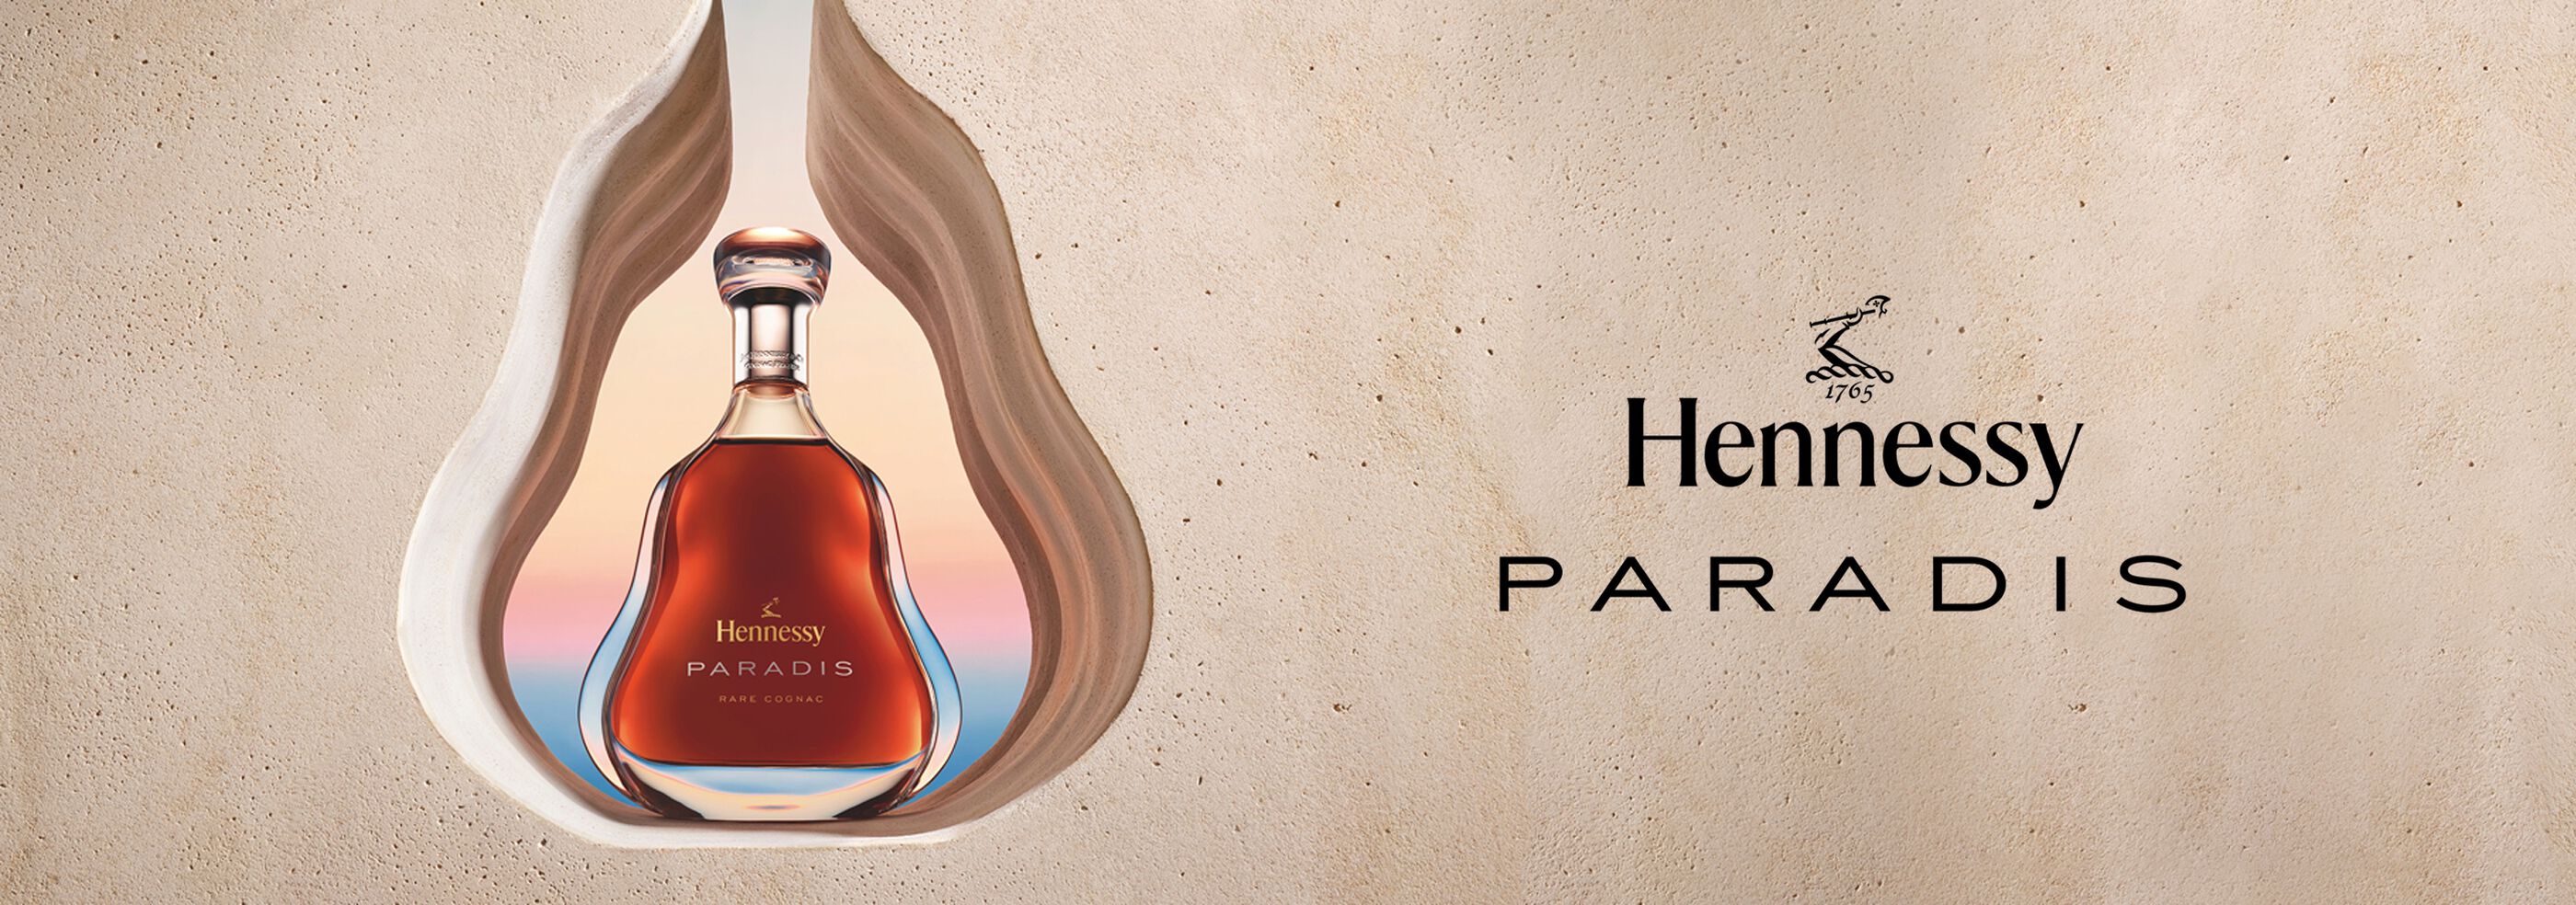 Hennessy Paradis bottle in rock wall cutout